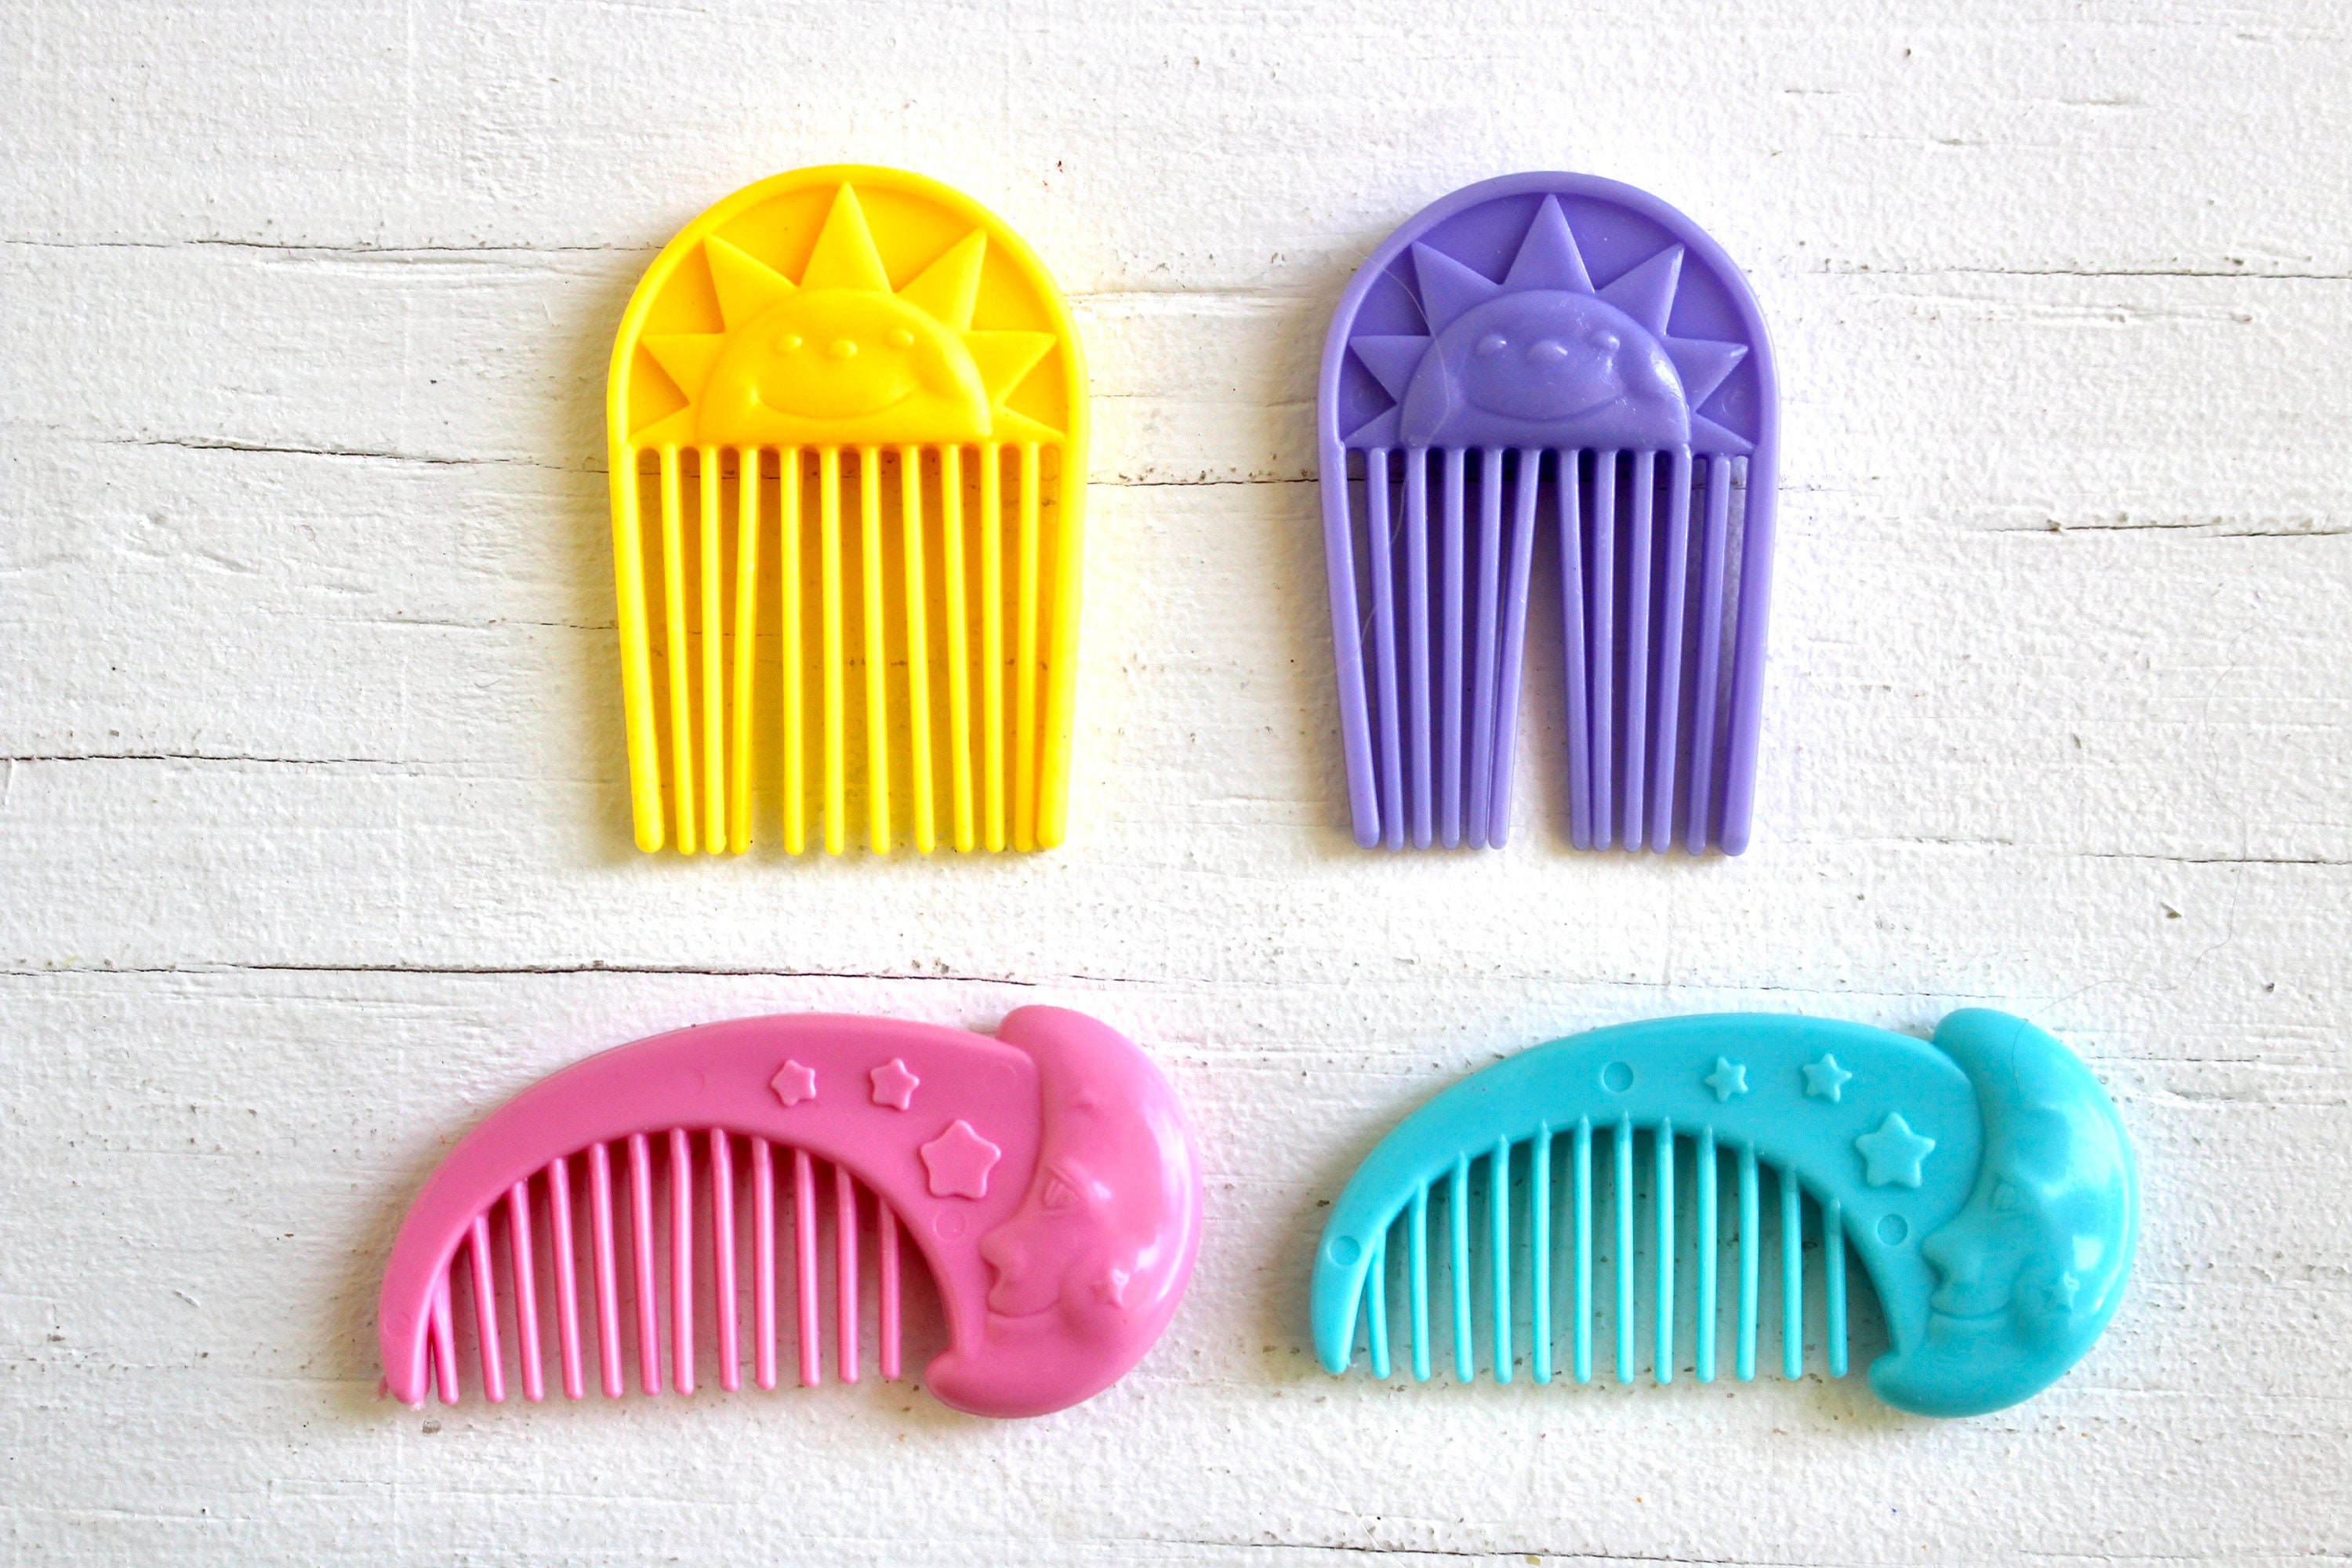 G1 My Little Pony Accessories– Combs & Brushes ID-ed to Pony Vtg 1980s U Pick